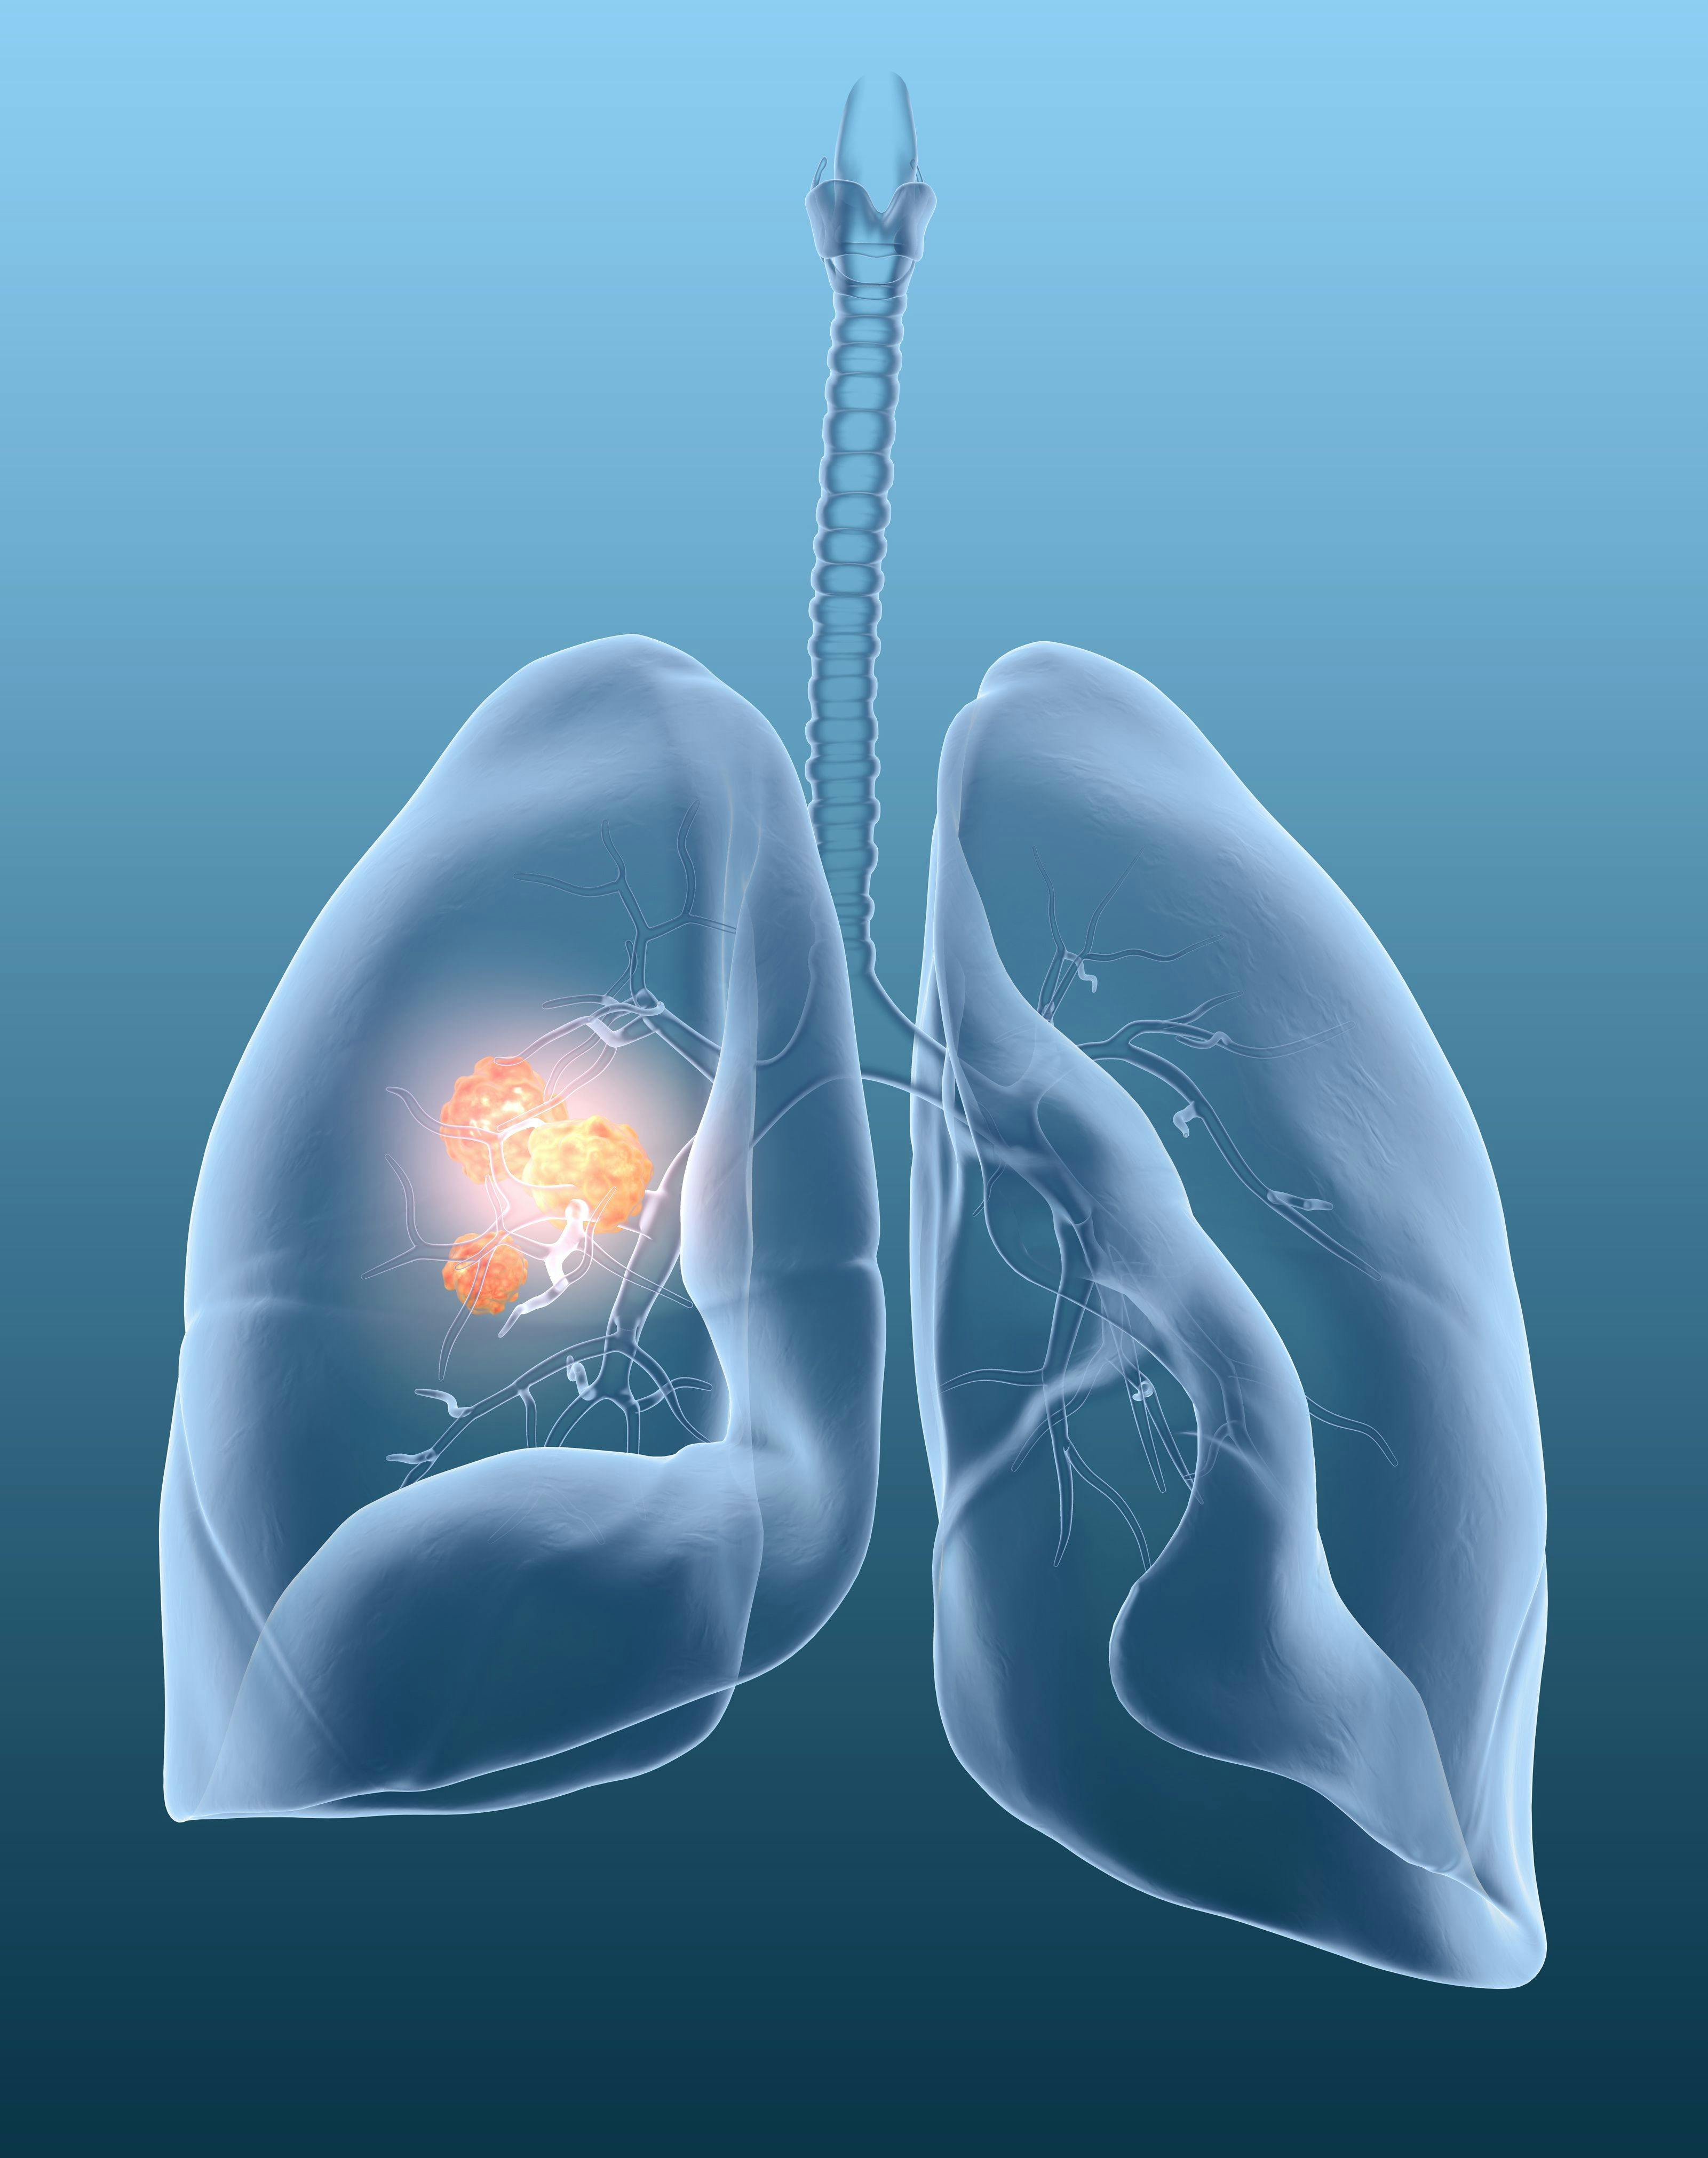 Spectrum Pharmaceuticals Submits New Drug Application for Poziotinib for NSCLC